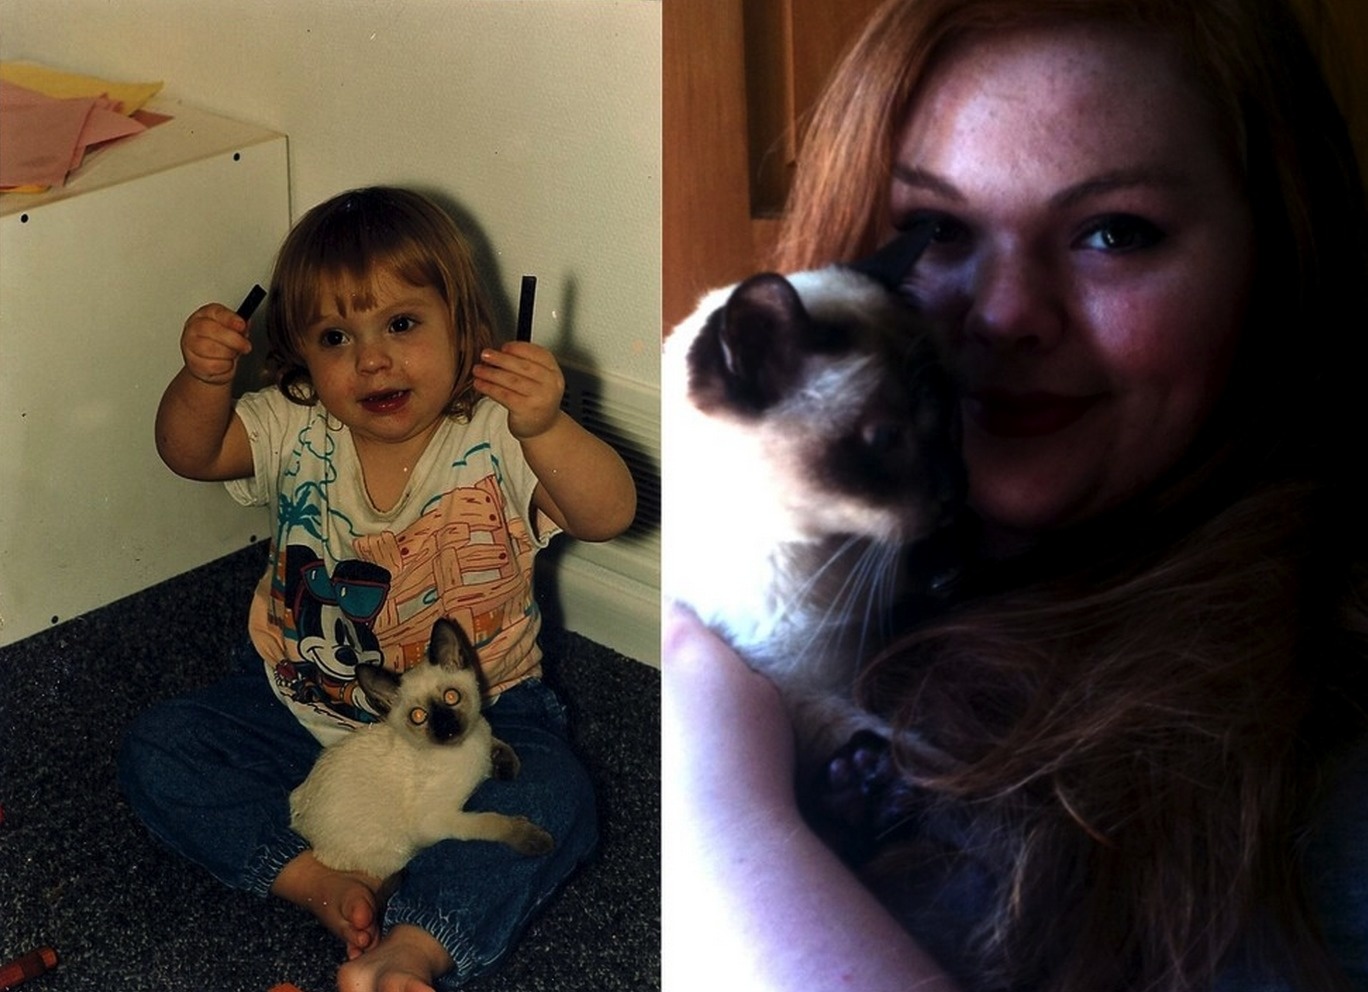 "Our first and last pictures together. Mortimer, 1991-2010."